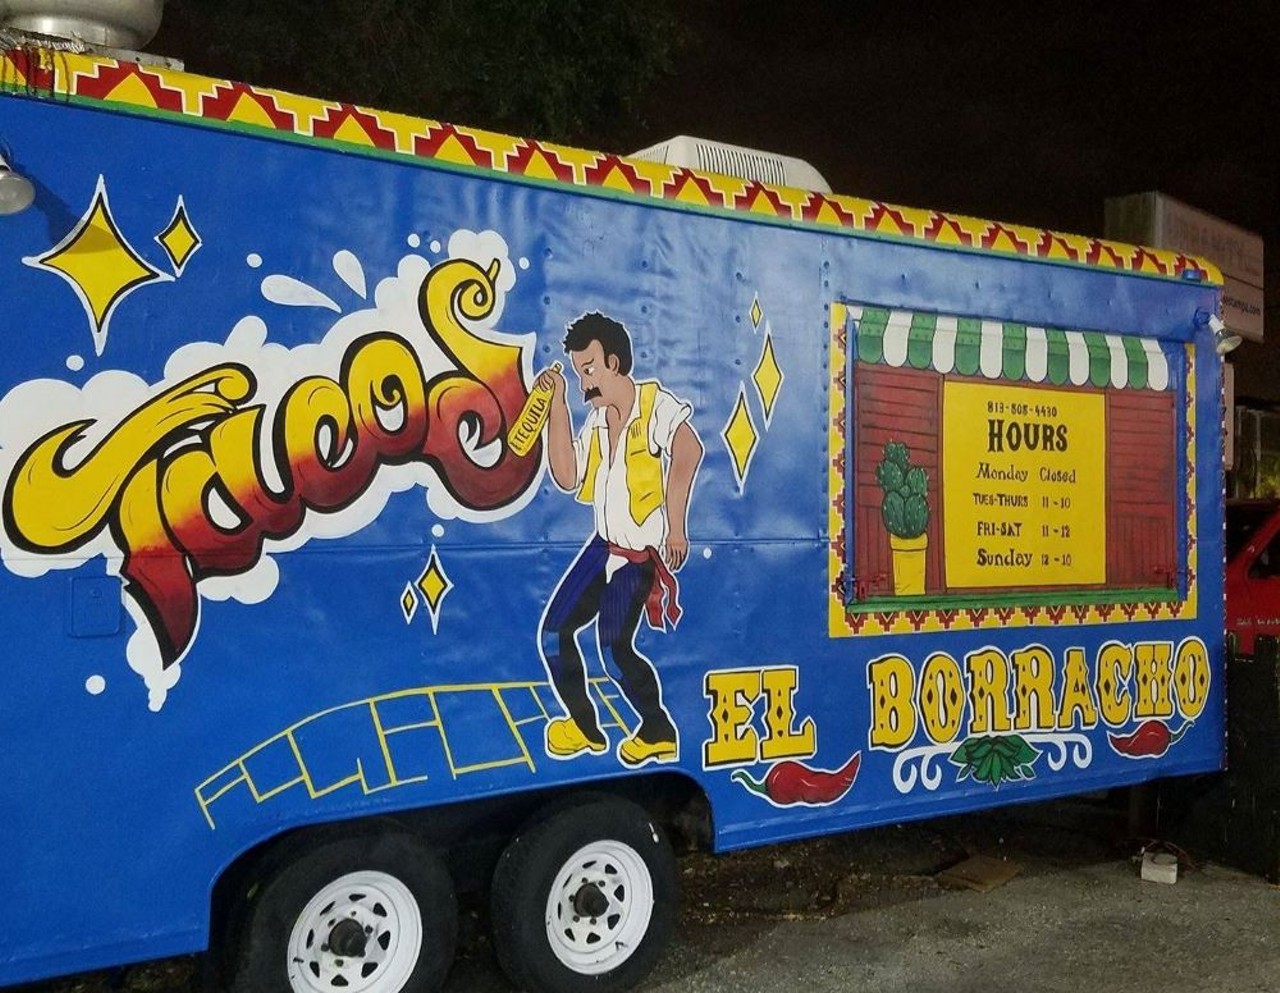 Tacos El Borracho 
2602 W Kennedy Blvd., Tampa, 813-805-4430
Let your beer munchies leads you here to grab a couple tacos or a cheesy quesadilla before (or after) you pump gas at the Marathon the truck sits at.
Photo via Tacos El Borracho/Facebook